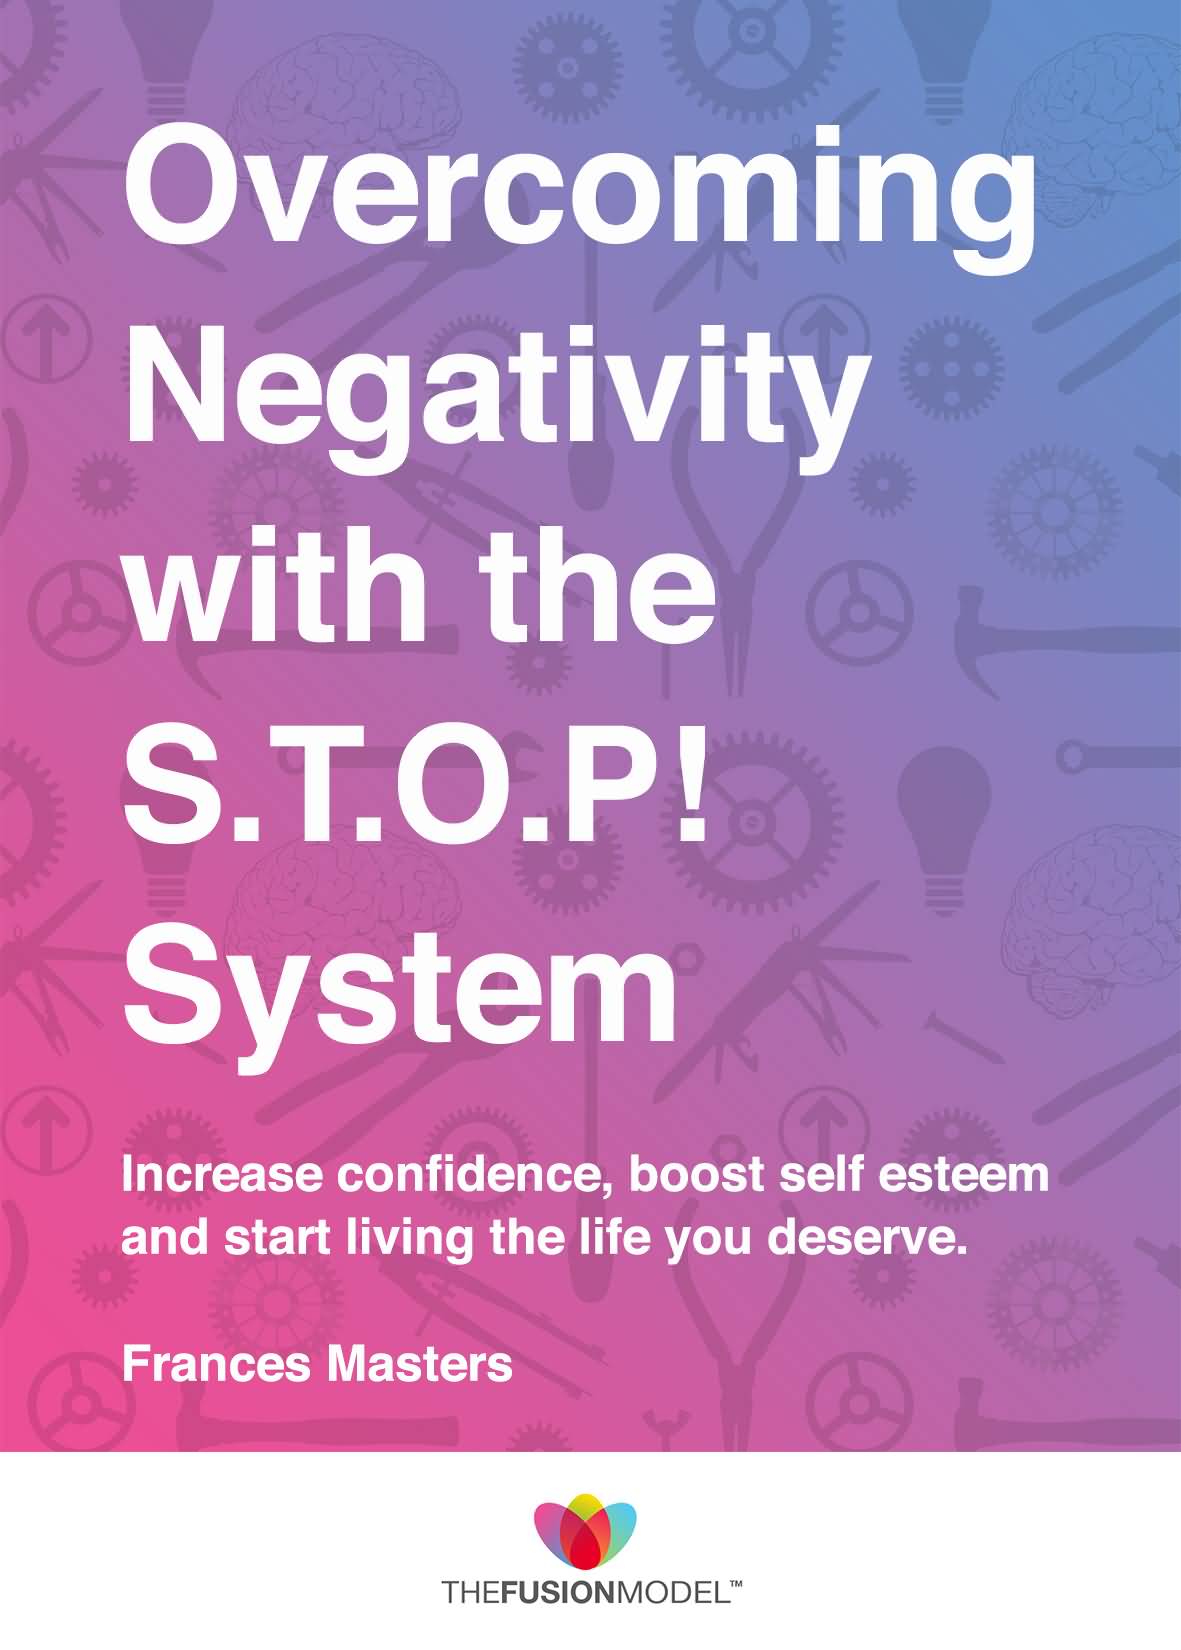 Overcoming negativity with STOP system Increase confidence, boost self esteem and start living the life you deserve. Frances Masters